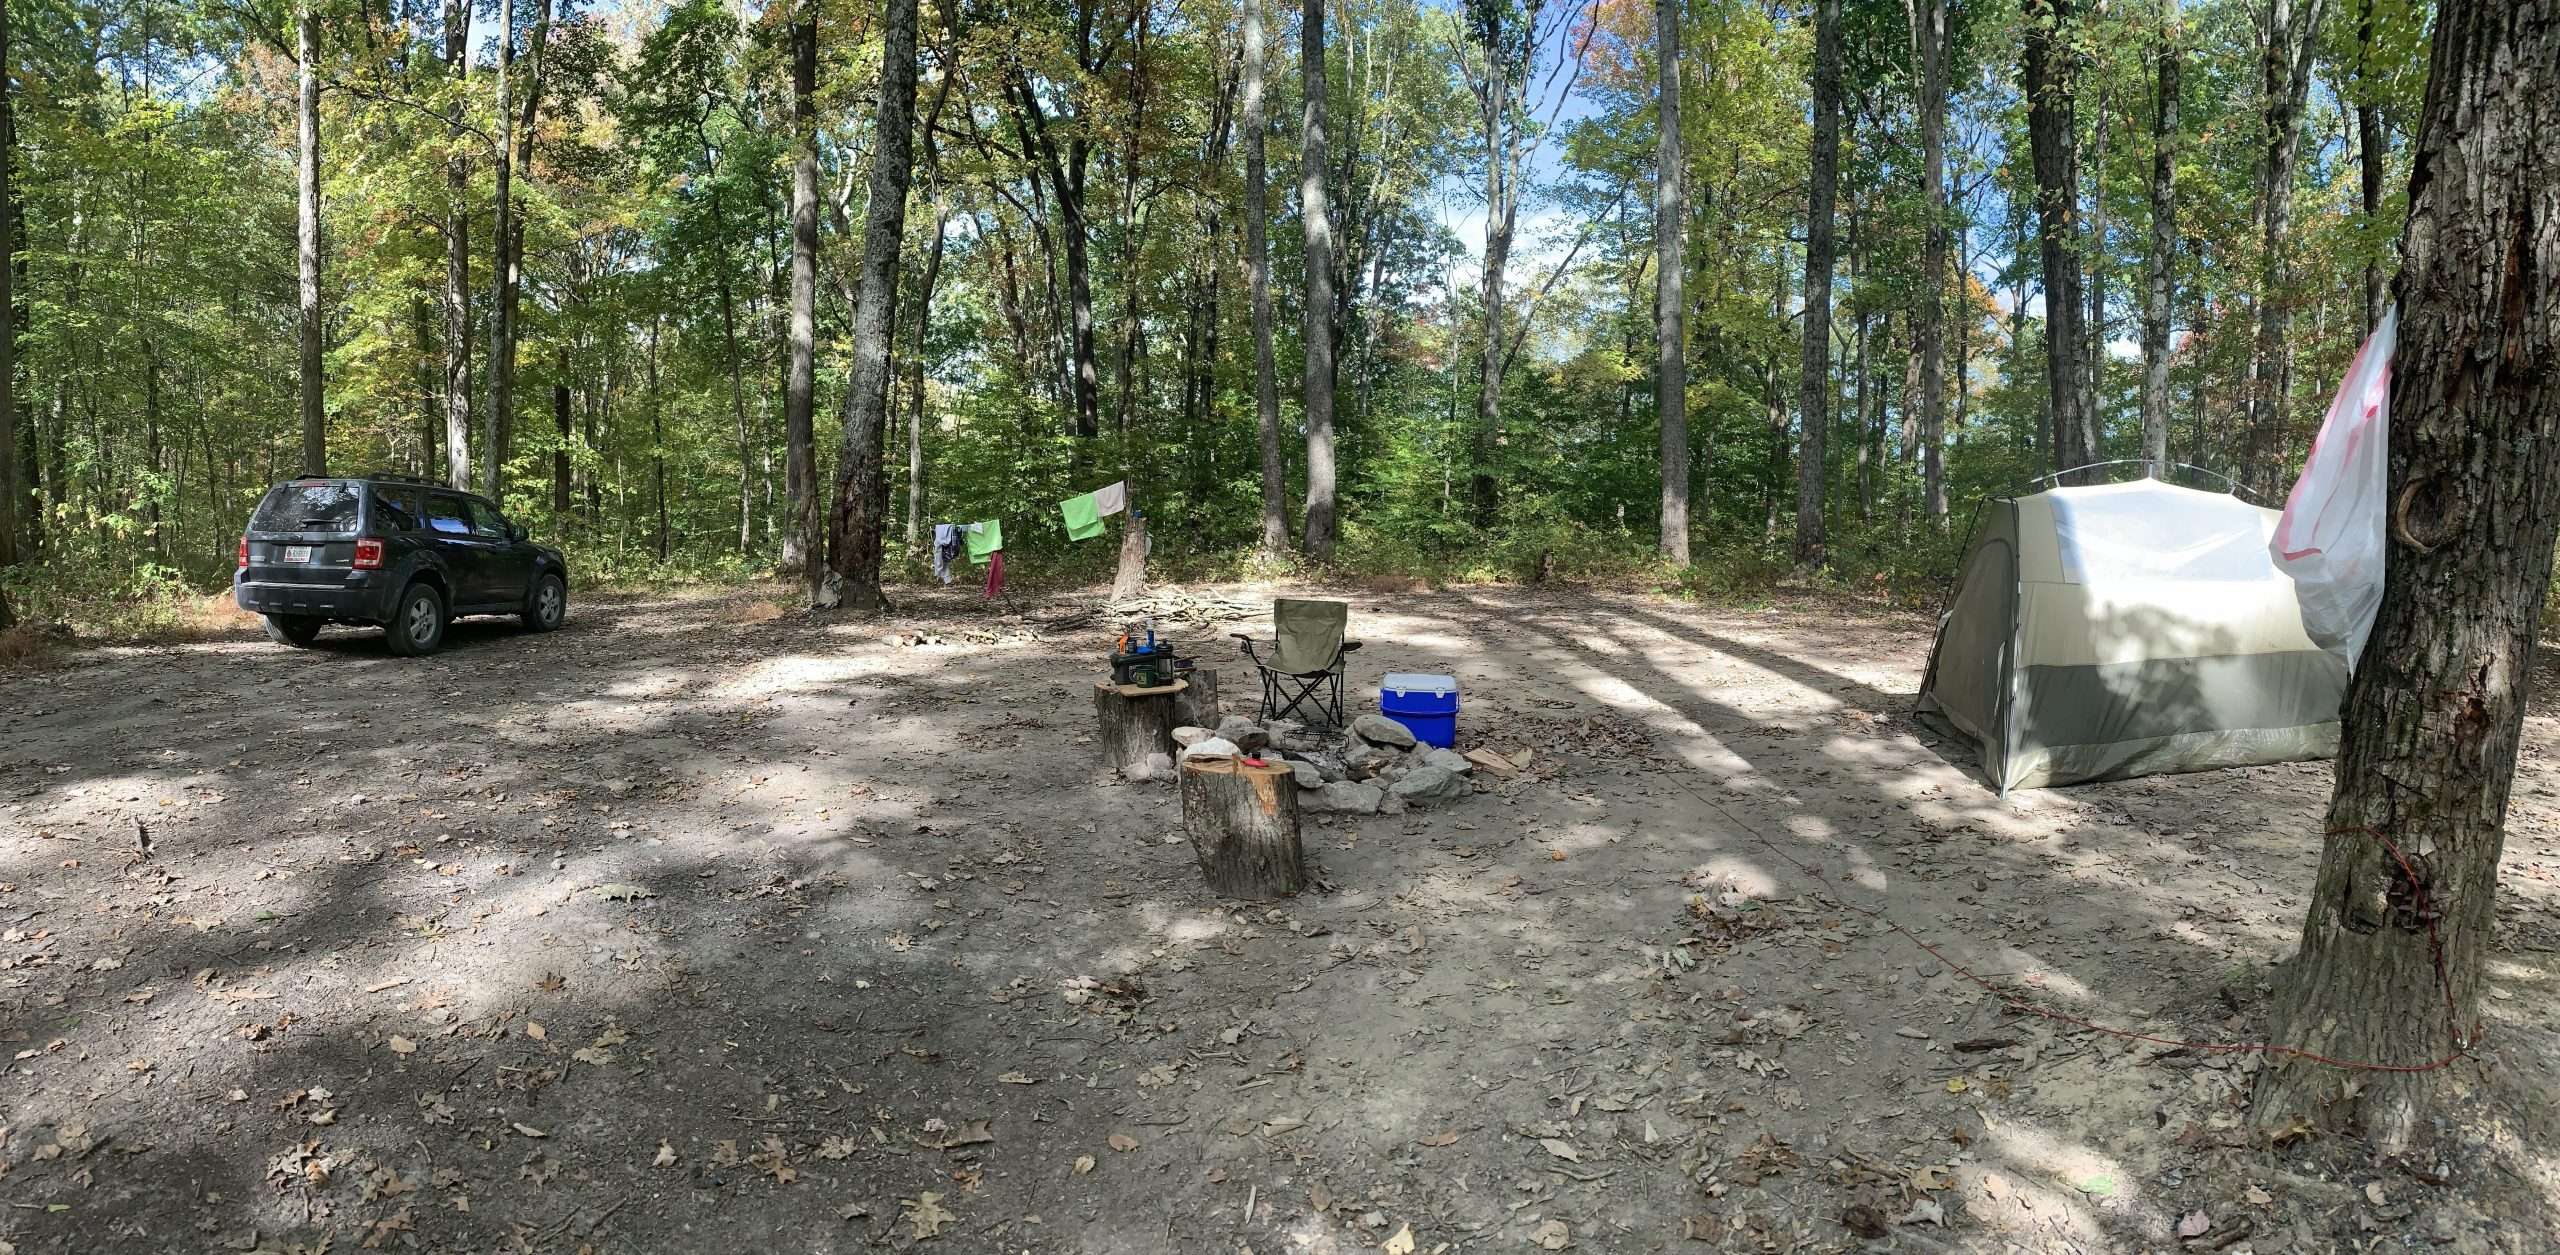 Primitive spot at Hoosier National Forest. My favorite area to camp! # ...